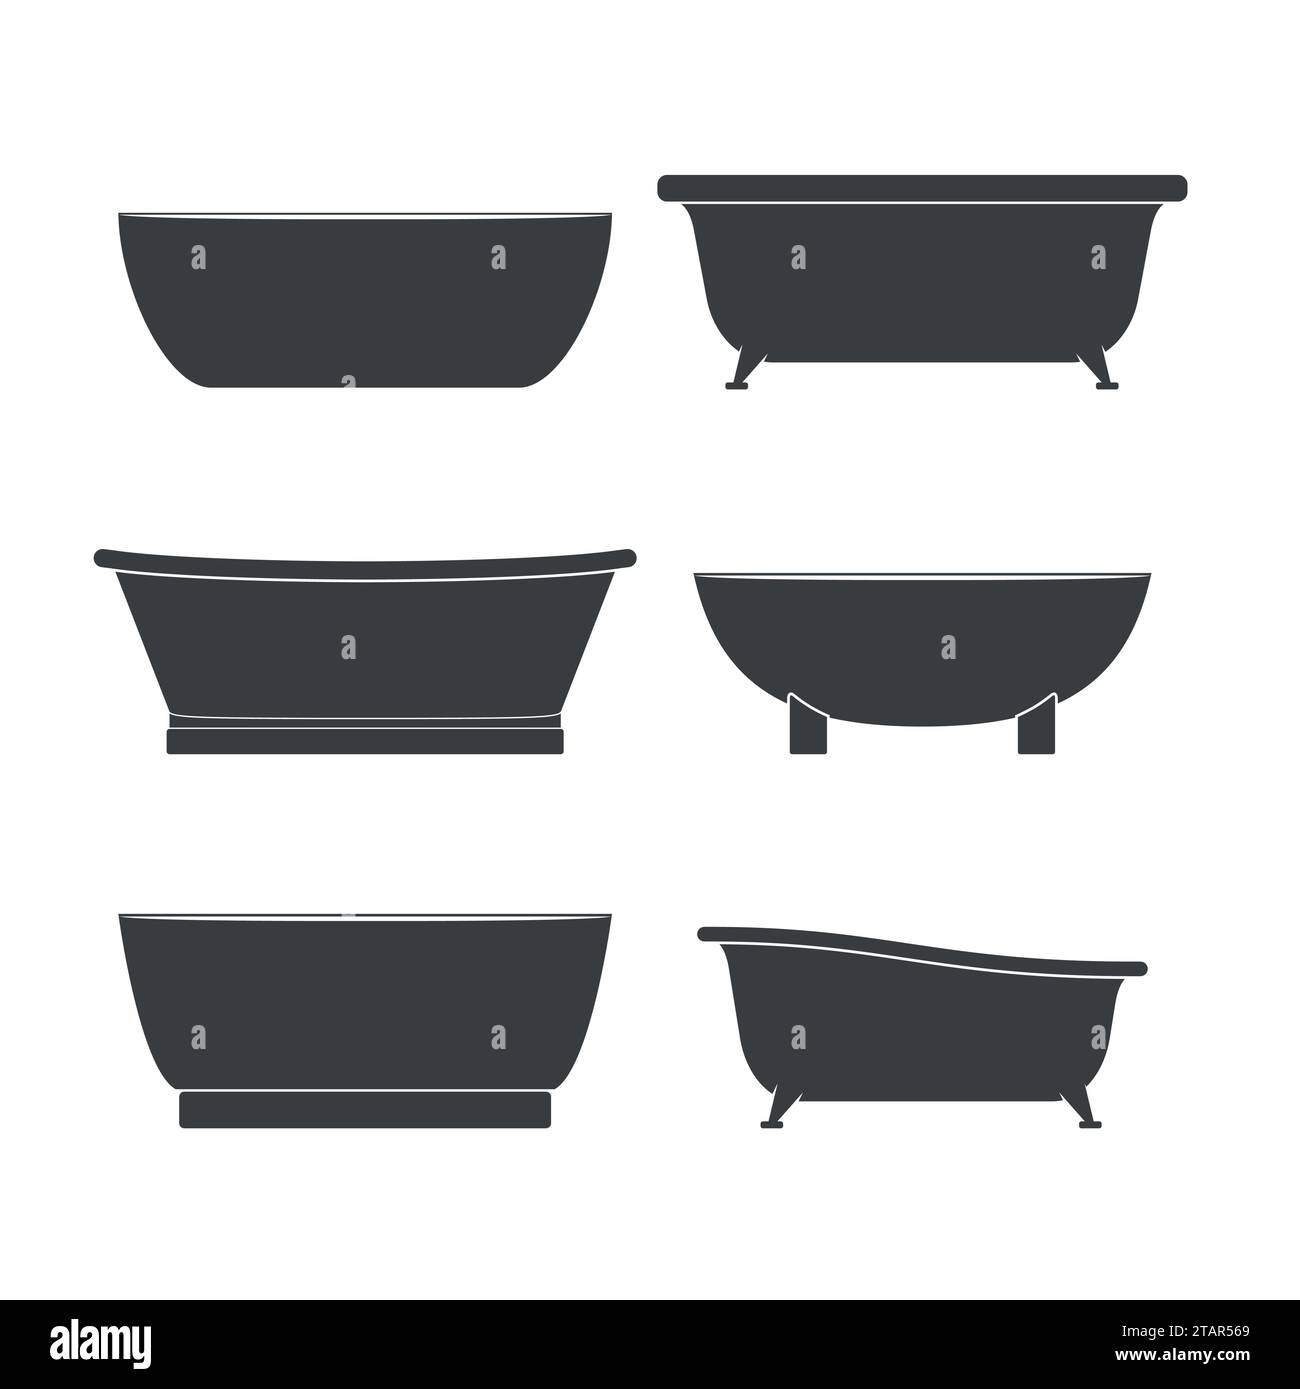 Bathtubs icons of different style and shape set isolated on white background vector illustration Stock Vector